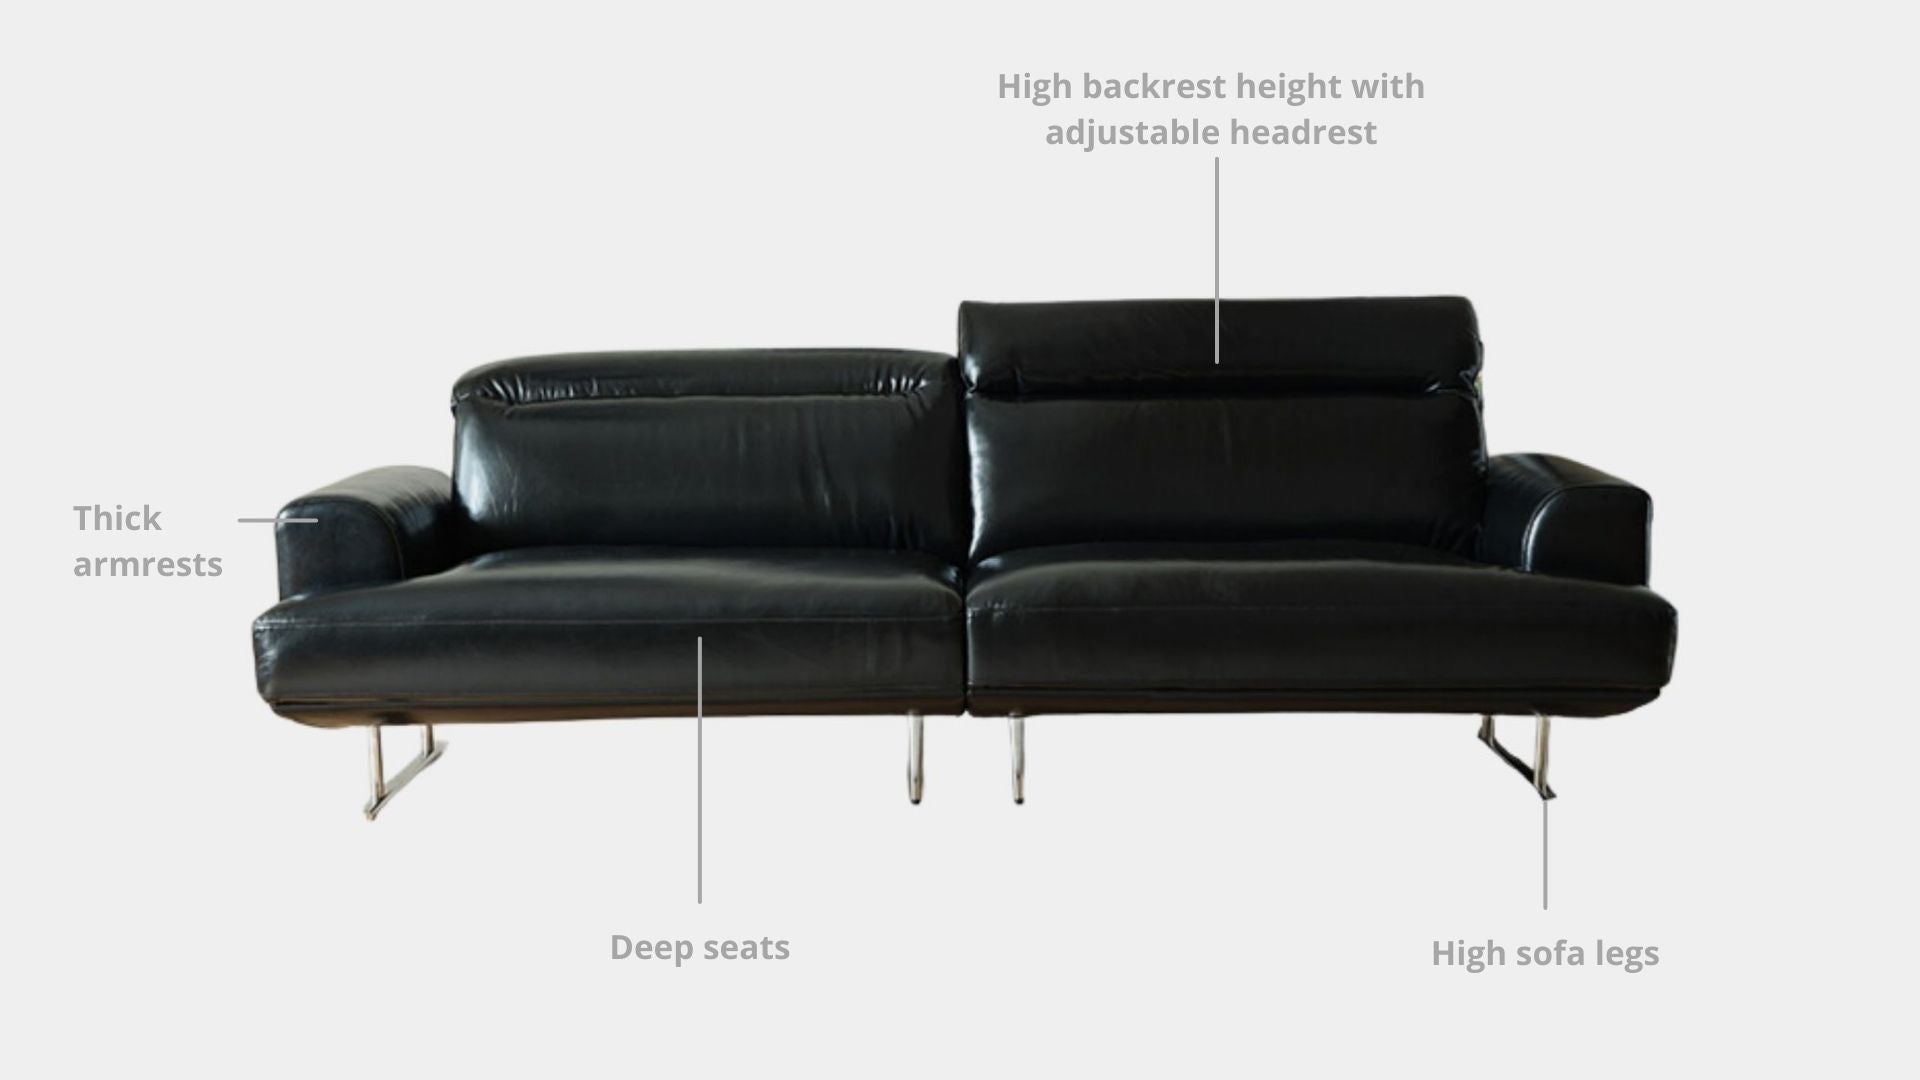 Key features such as armrest thickness, cushion height, seat depth and sofa leg height for Charles Half Leather Sofa